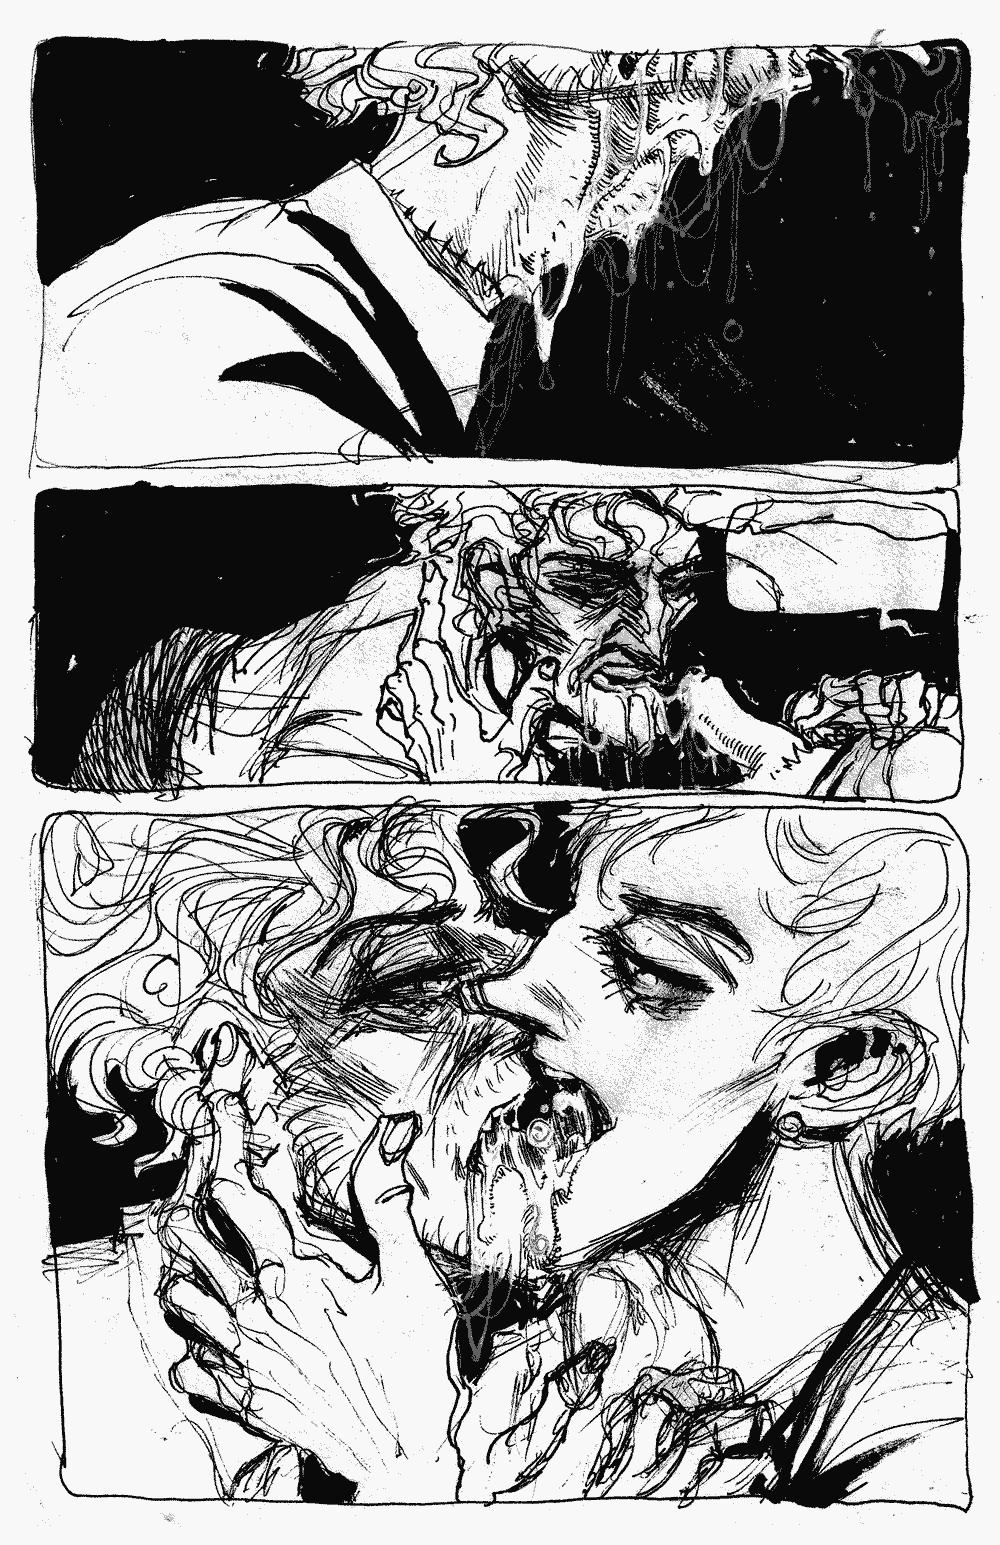 Page 5 - Viscous liquid pours down the older man's throat.  He releases himself from suckin' mad dick.  Both men passionately kiss and trade sperm within their mouths and tongues.